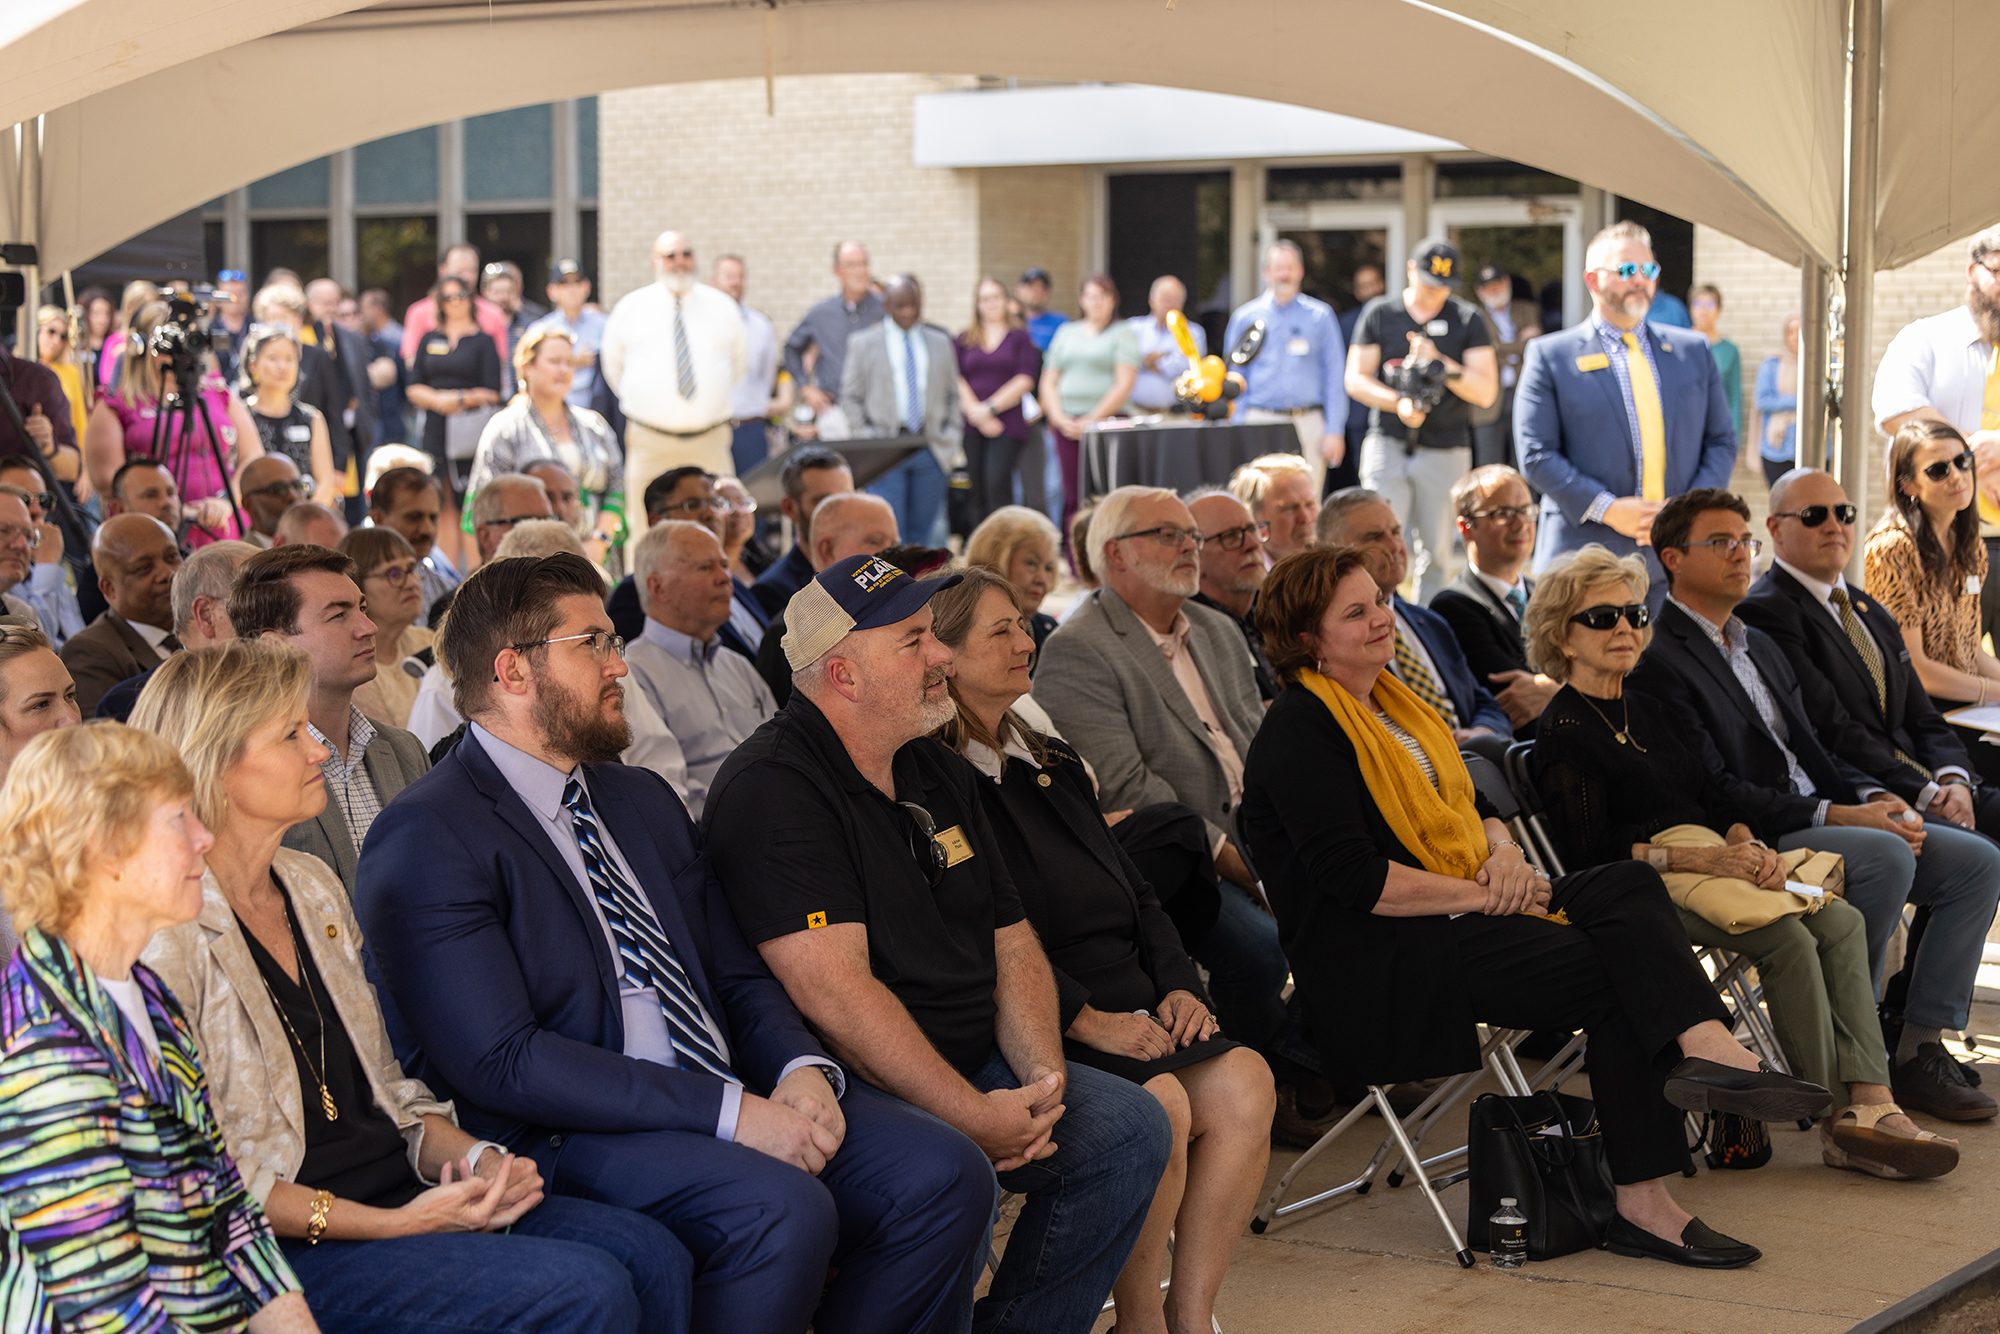 Audience members from across the University of Missouri, the state of Missouri, and around the country gathered at the University of Missouri Research Reactor to commemorate the groundbreaking of MURR West, a new 47,000-square-foot addition to the MURR facility.